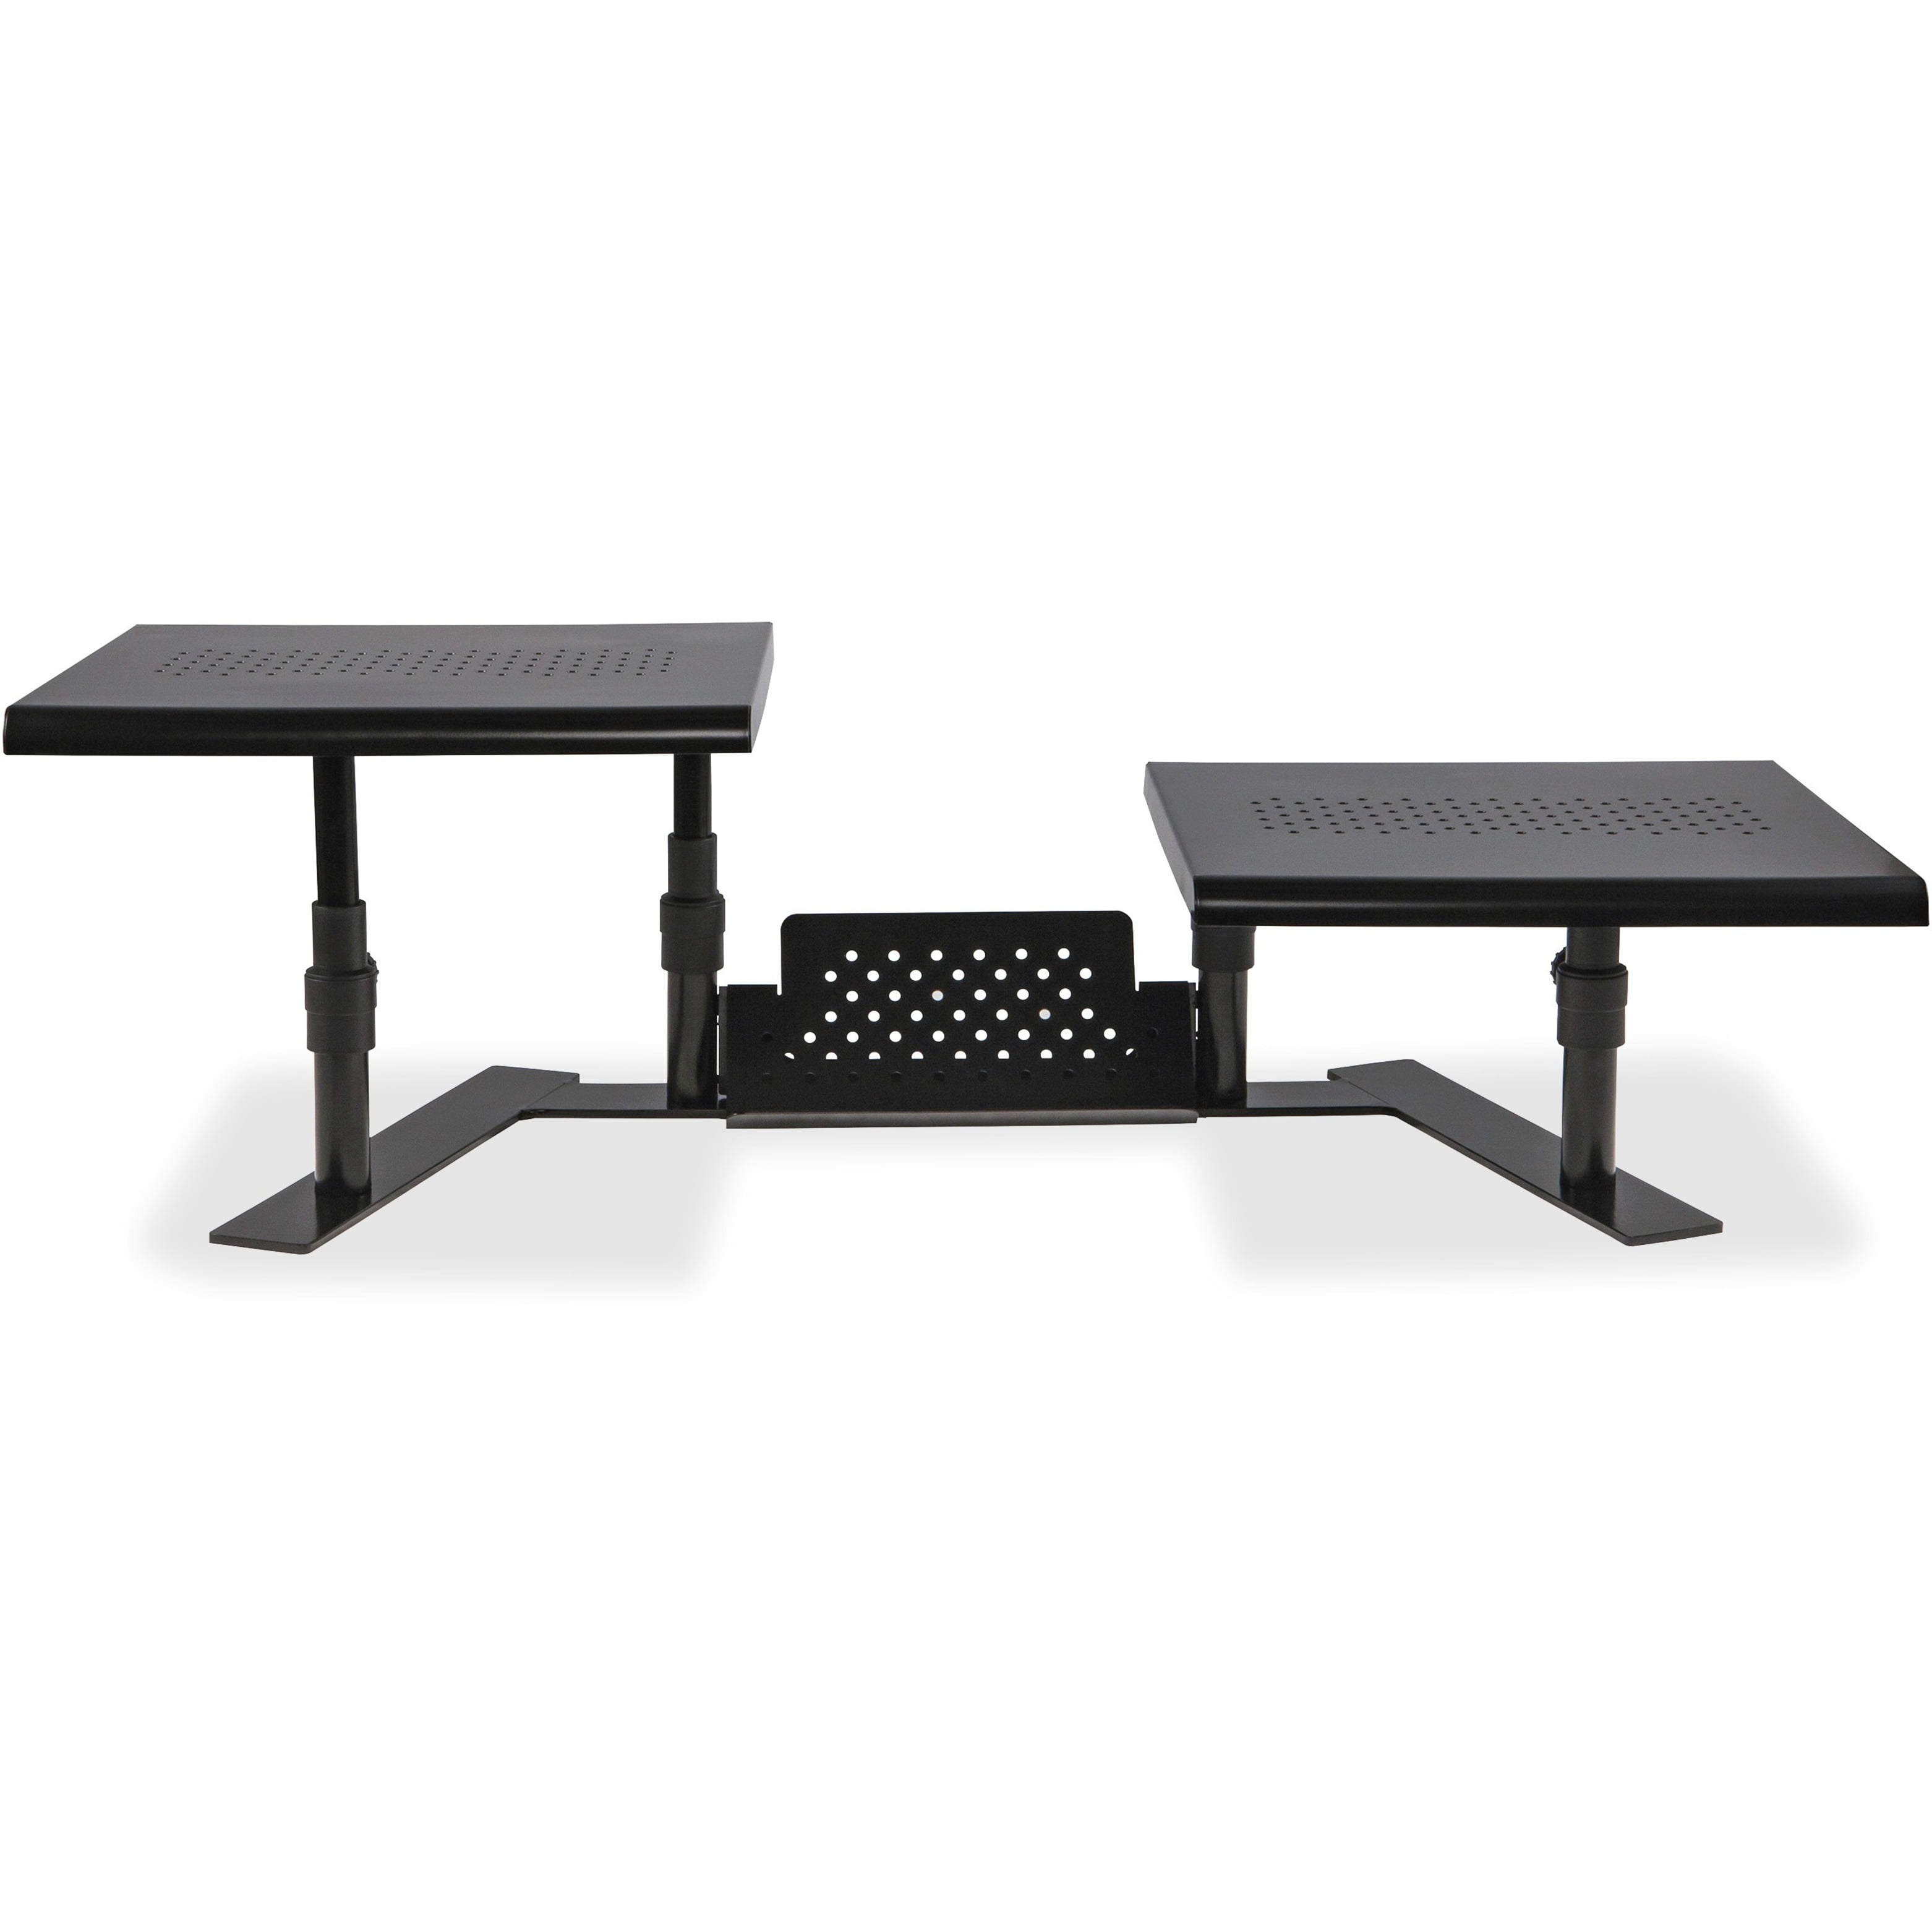 Halter LZ-501 Monitor Stand Riser w/Tray